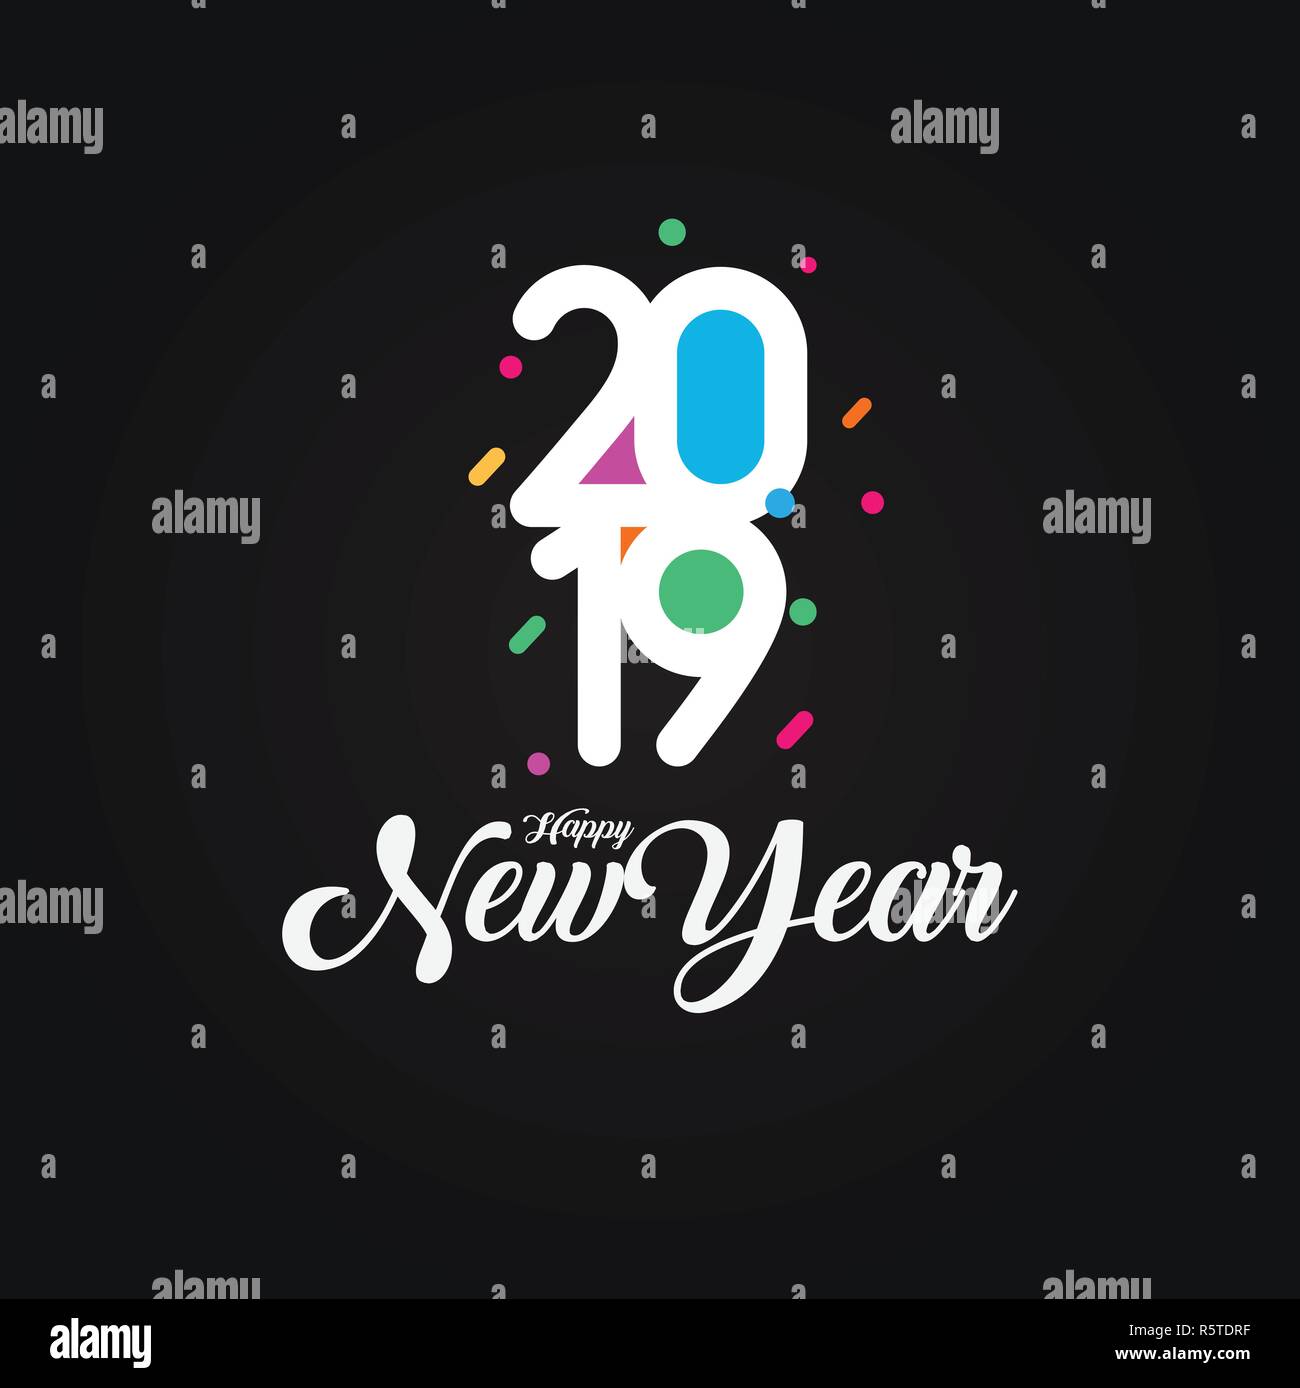 Creative Colorful Happy New Year 2019 design card on black background. Vector illustration. Stock Vector